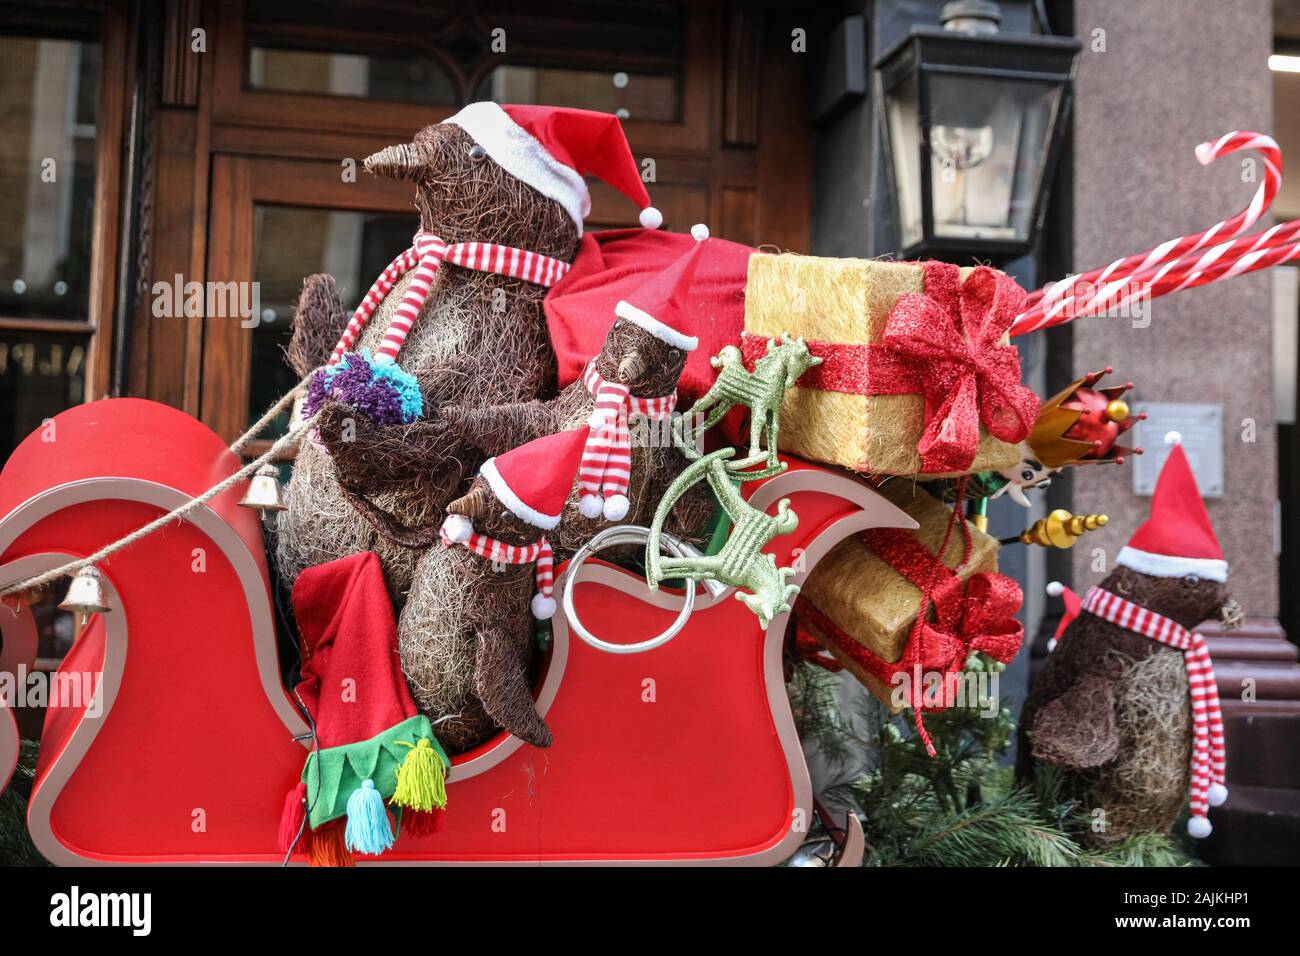 Christmas decorations in London, exterior, display of santa penguins and presents, UK Stock Photo